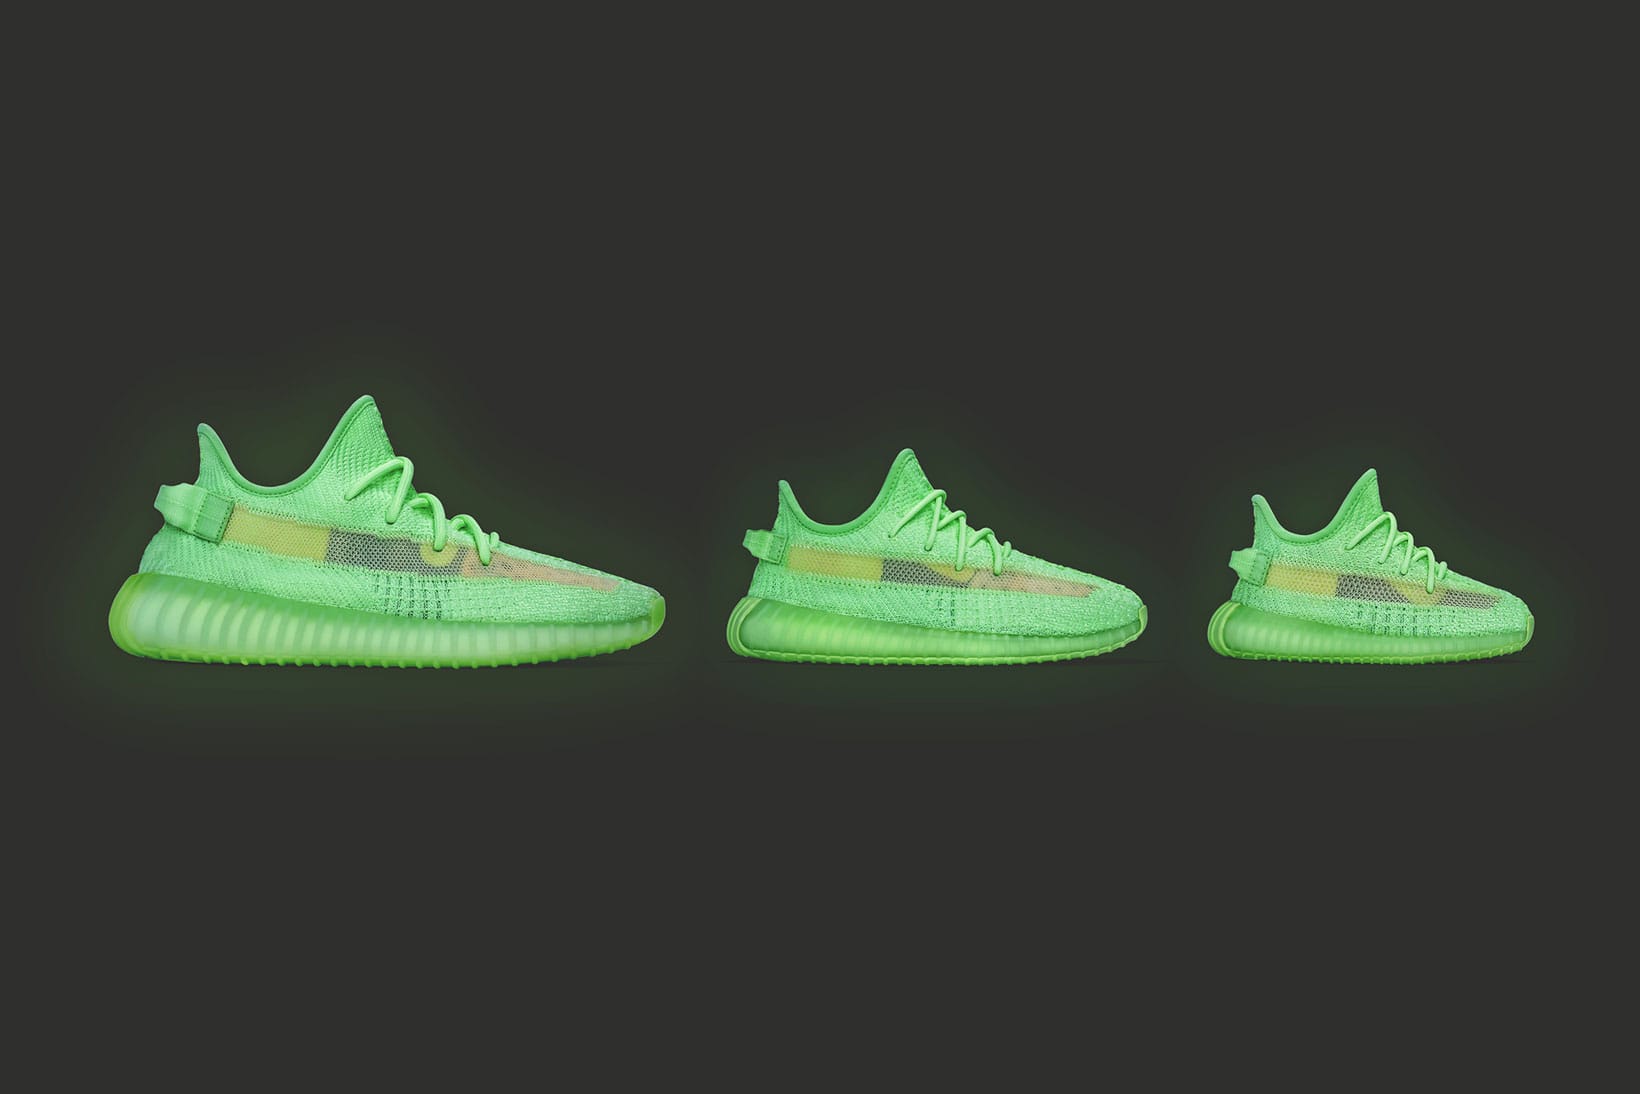 lime green yeezys for sale